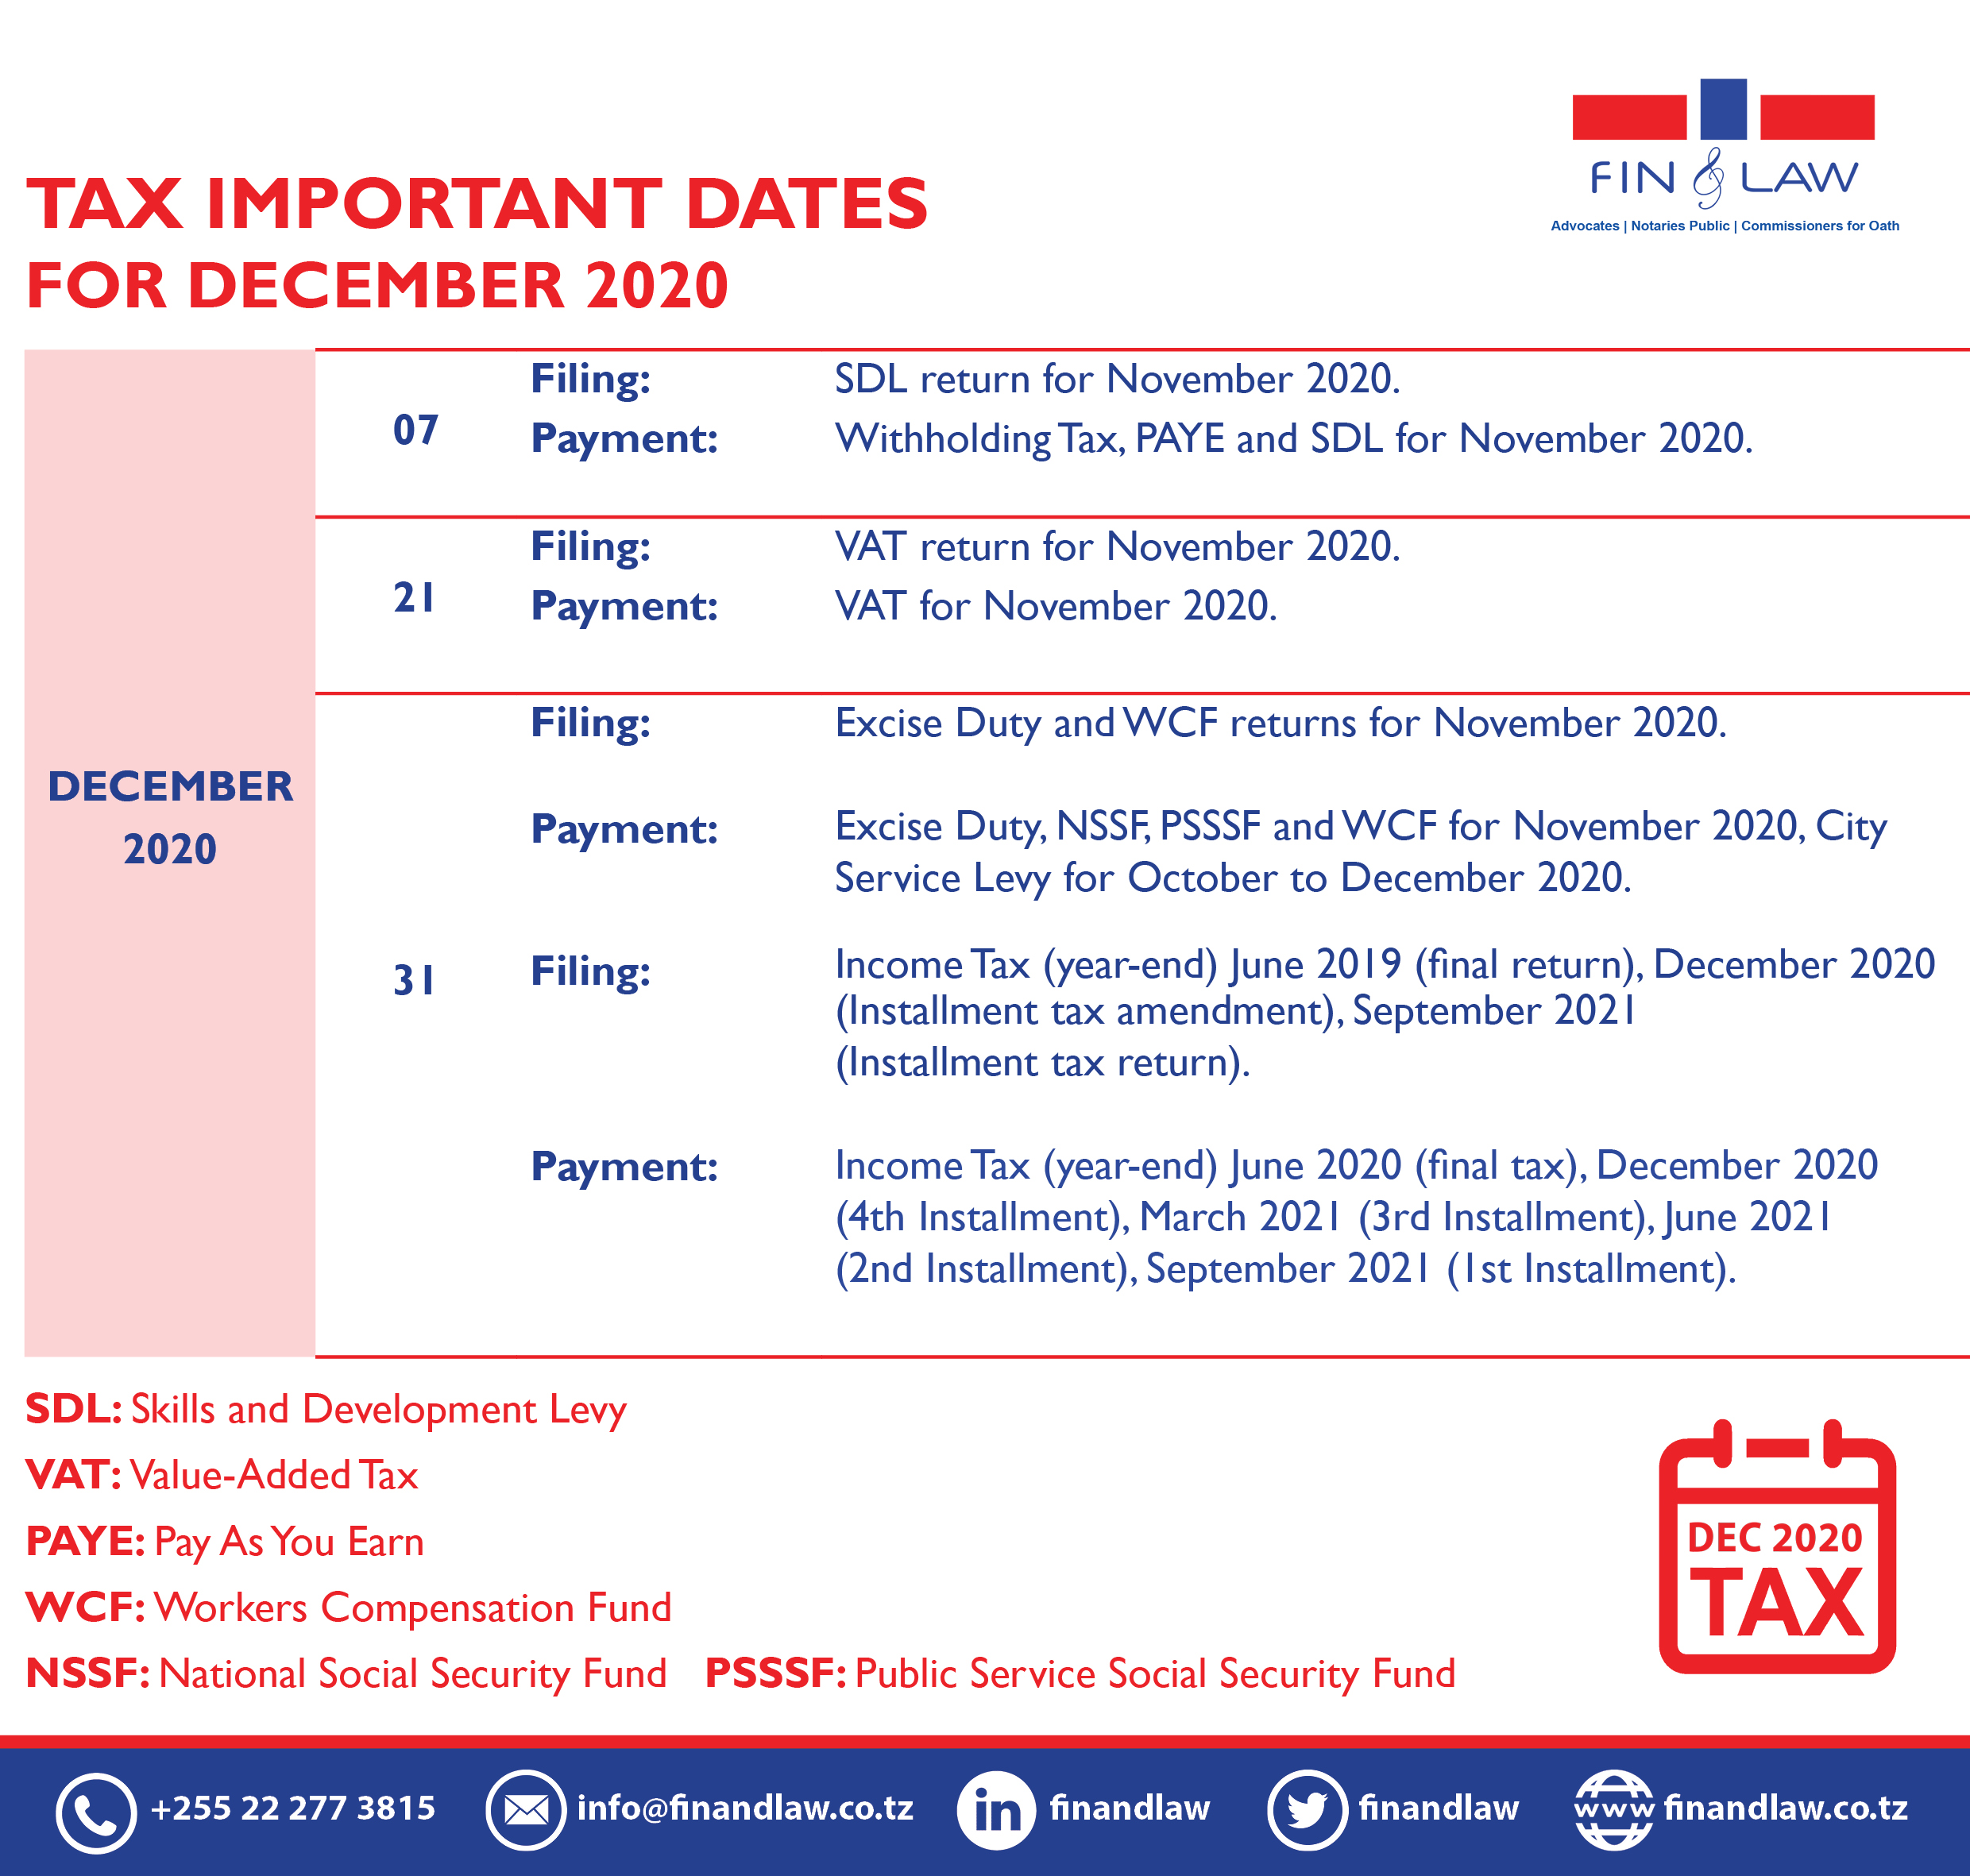 http://finandlaw.co.tz/wp-content/uploads/2021/04/FIN-LAW-Compliance-Update-Tax-and-Compliance-dates-for-December-2020.jpg